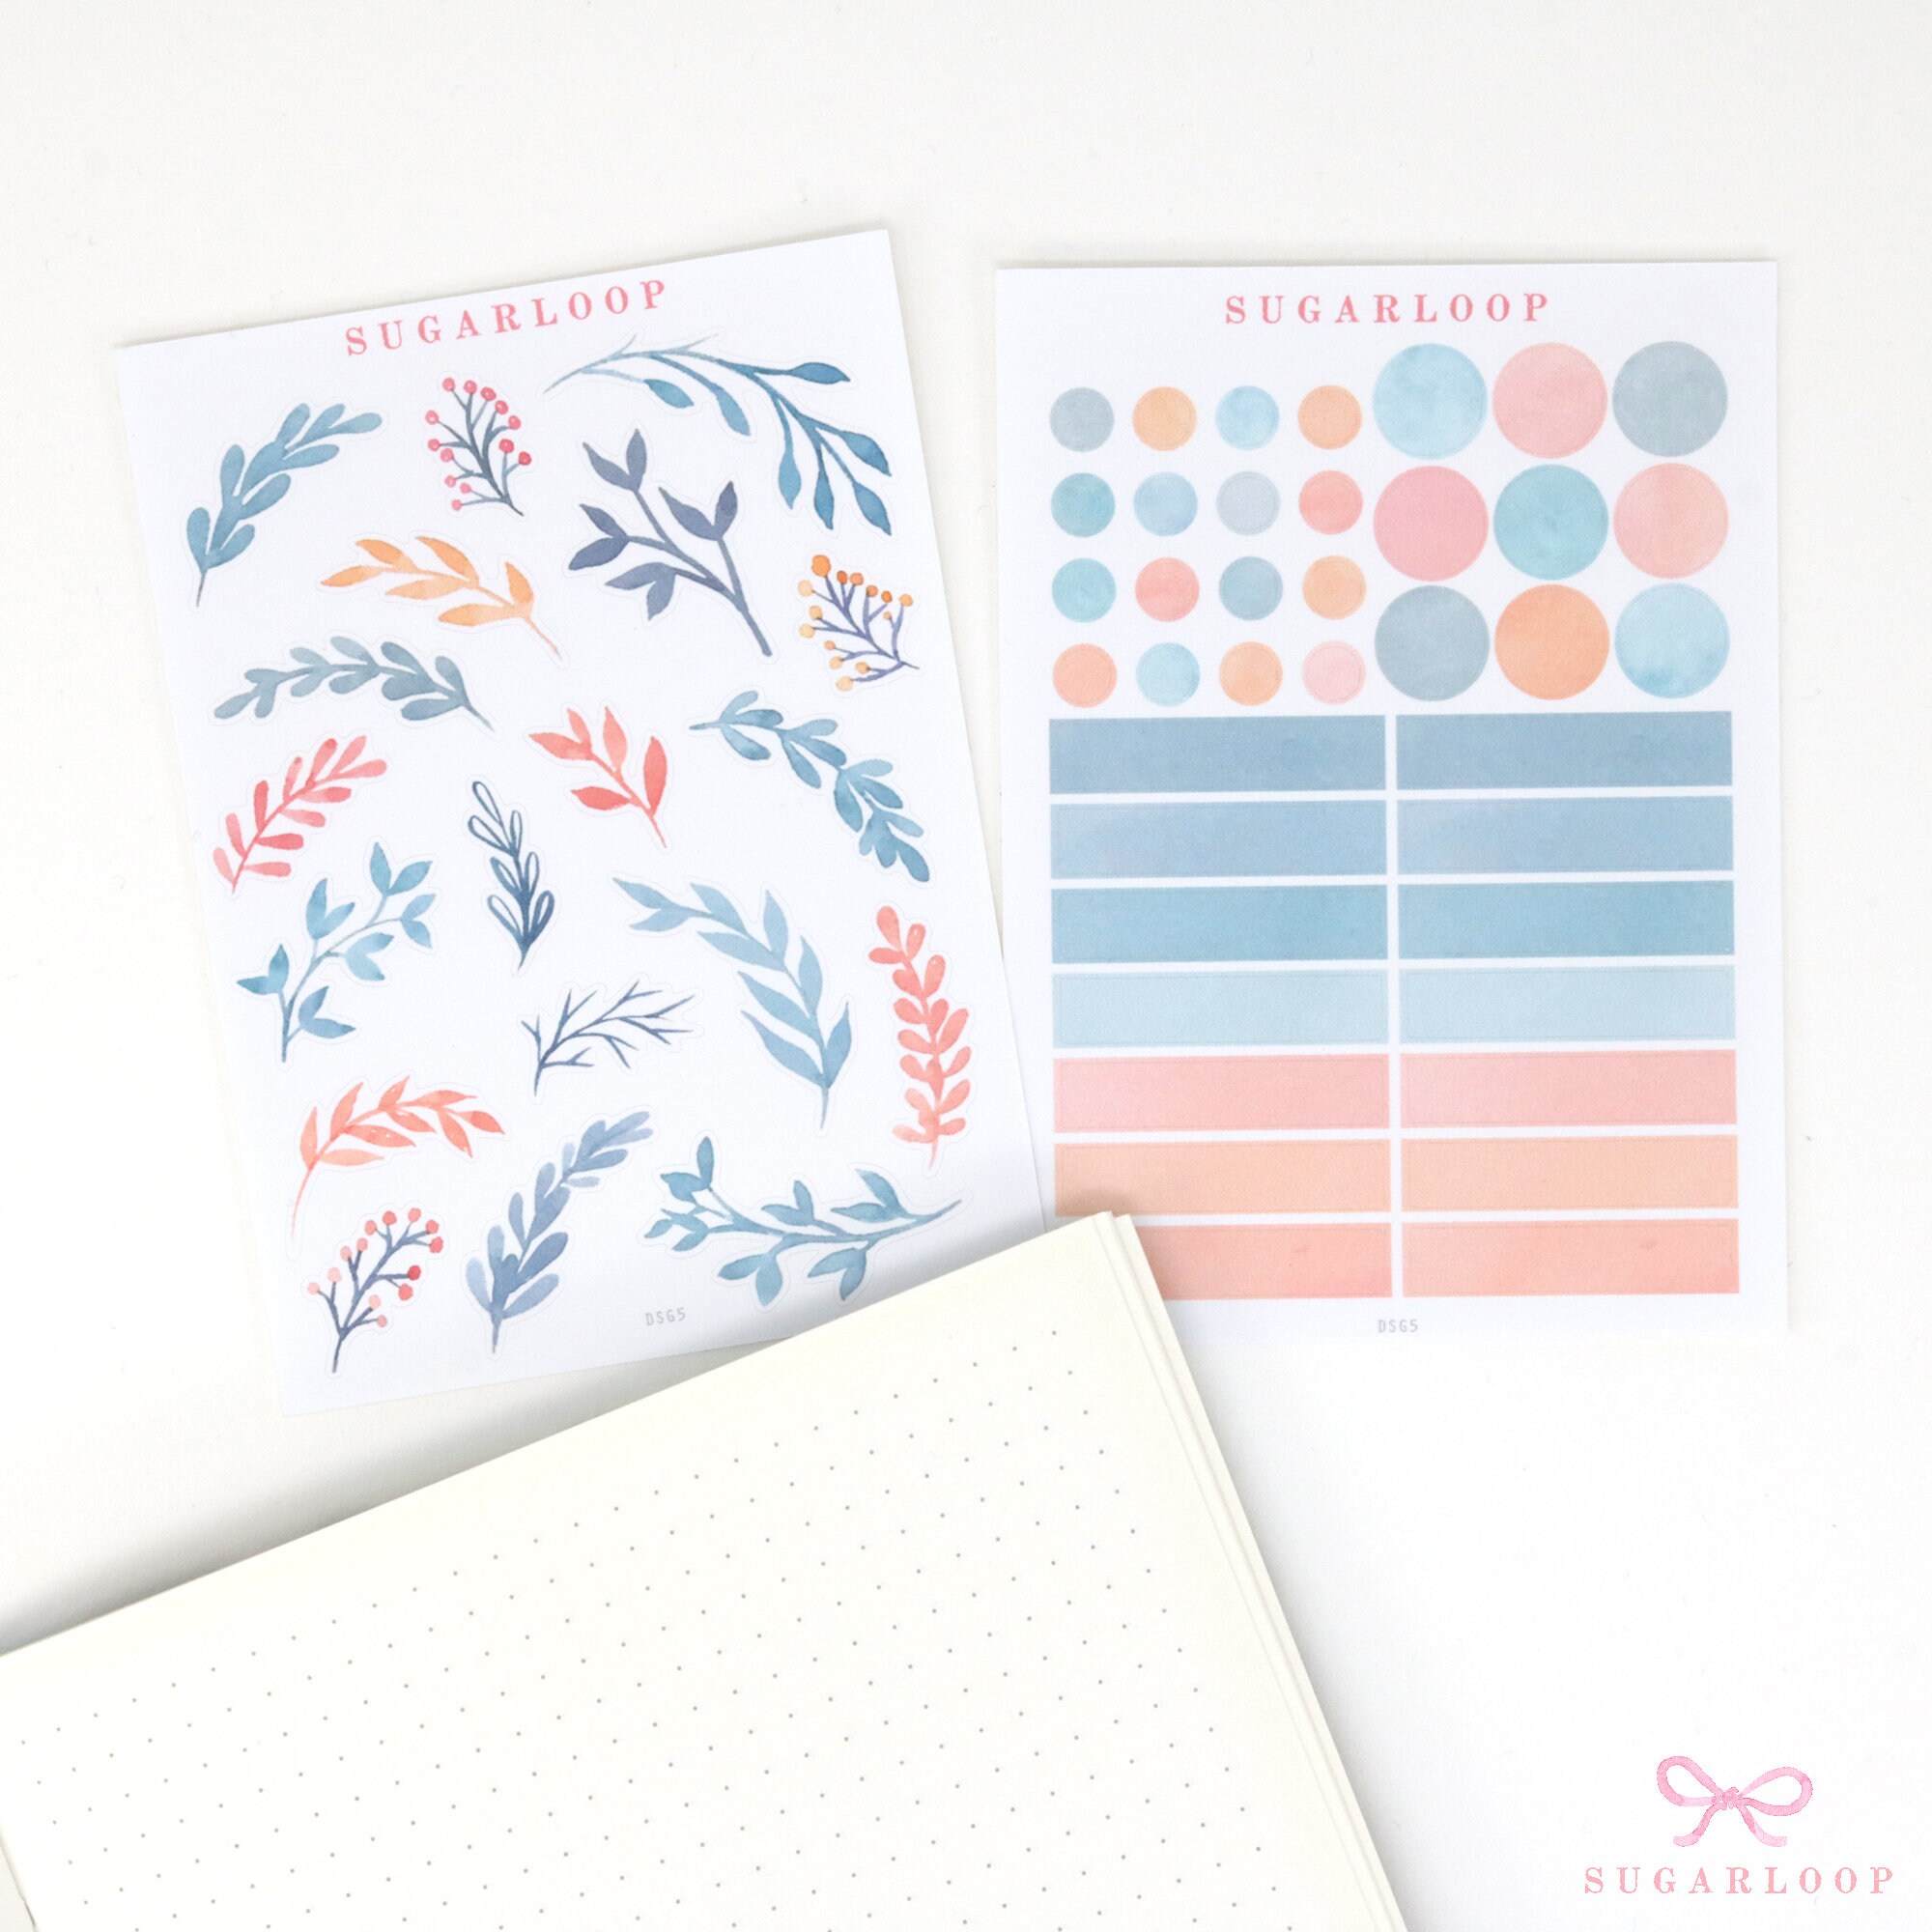 Small Script Month Planner Stickers, Monthly Stickers for Planners